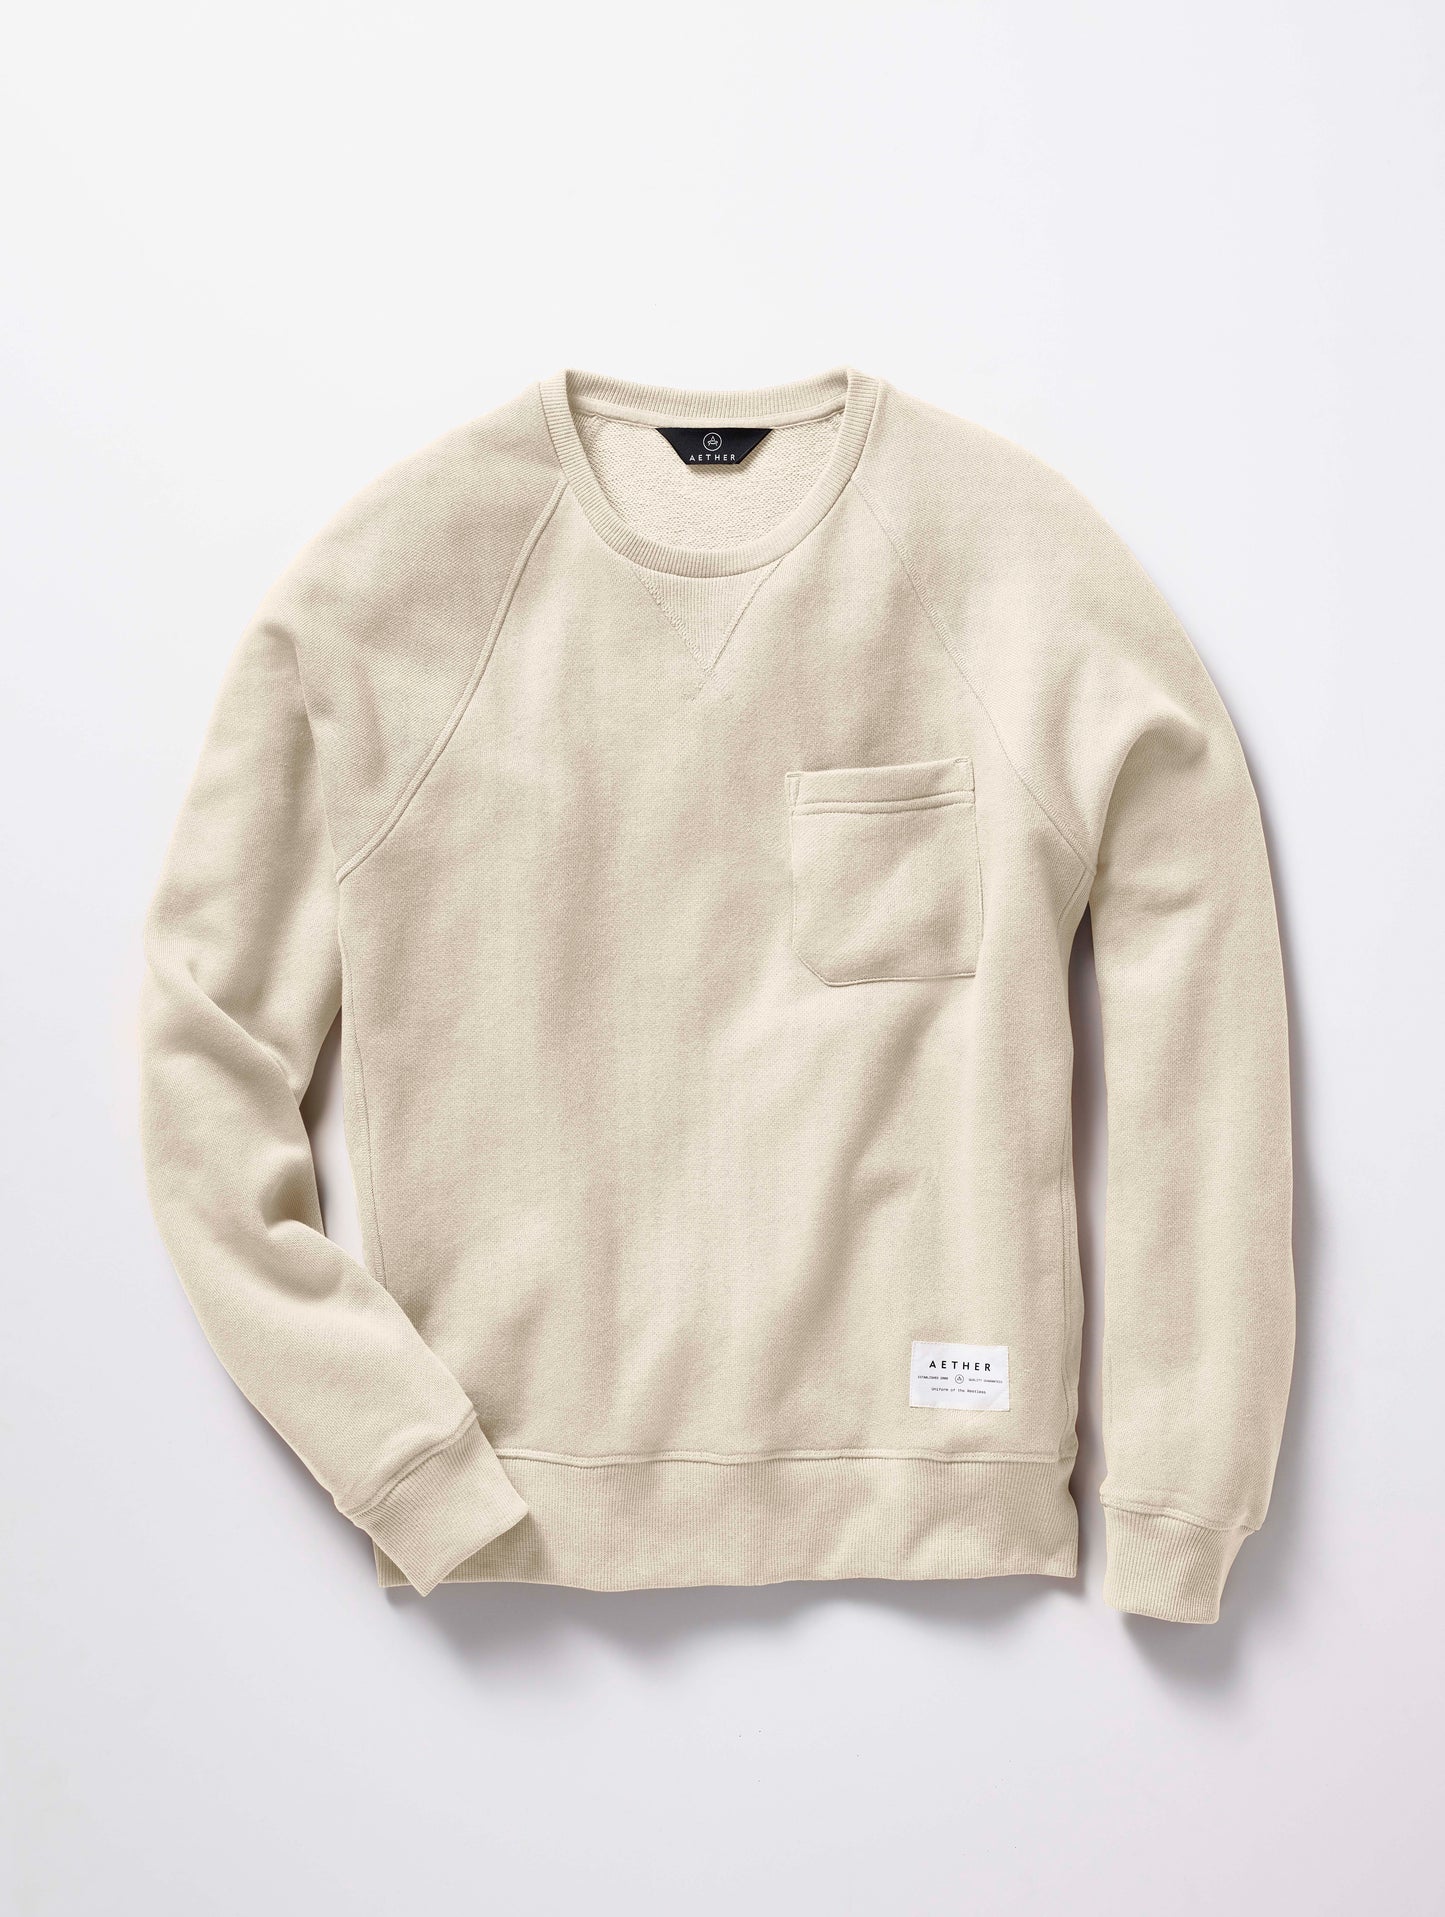 man wearing a beige crew neck with pocket